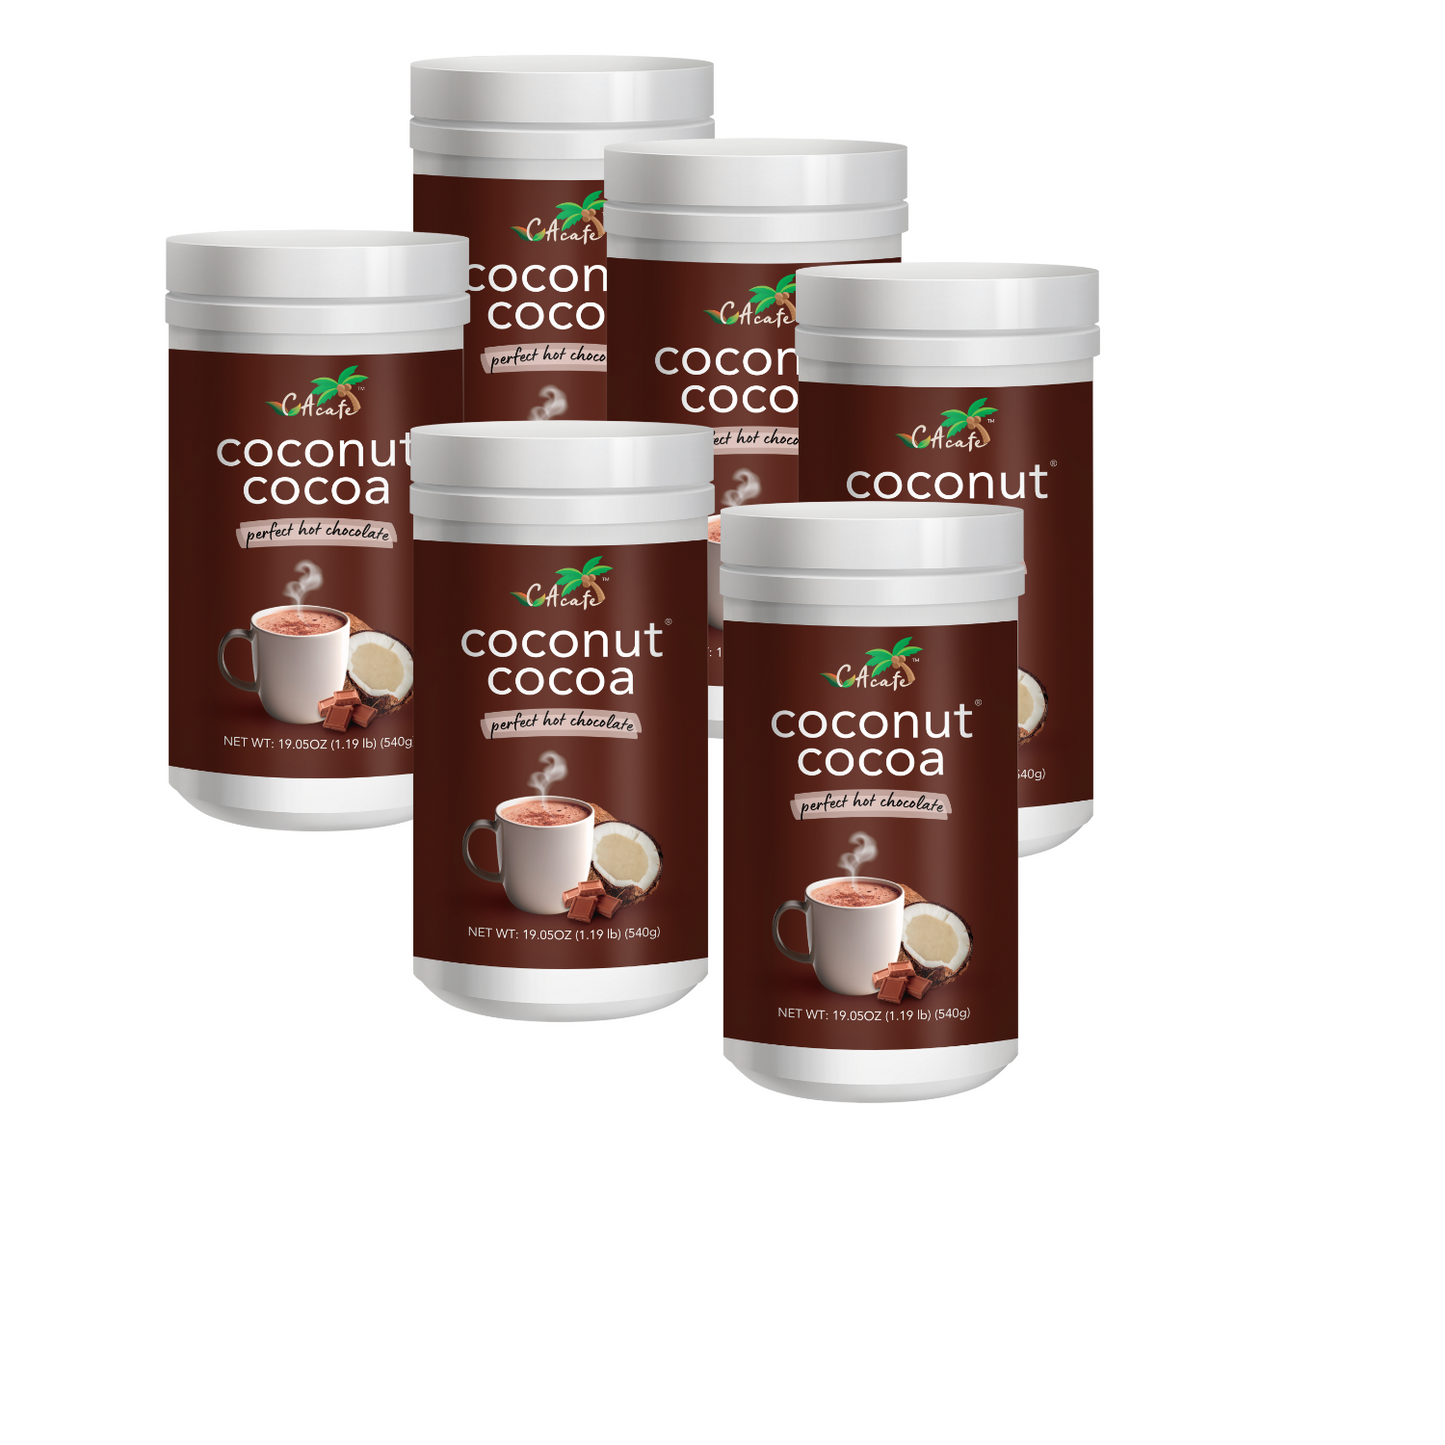 6 pack of Coconut Cocoa (New Look) _ 19.05oz each